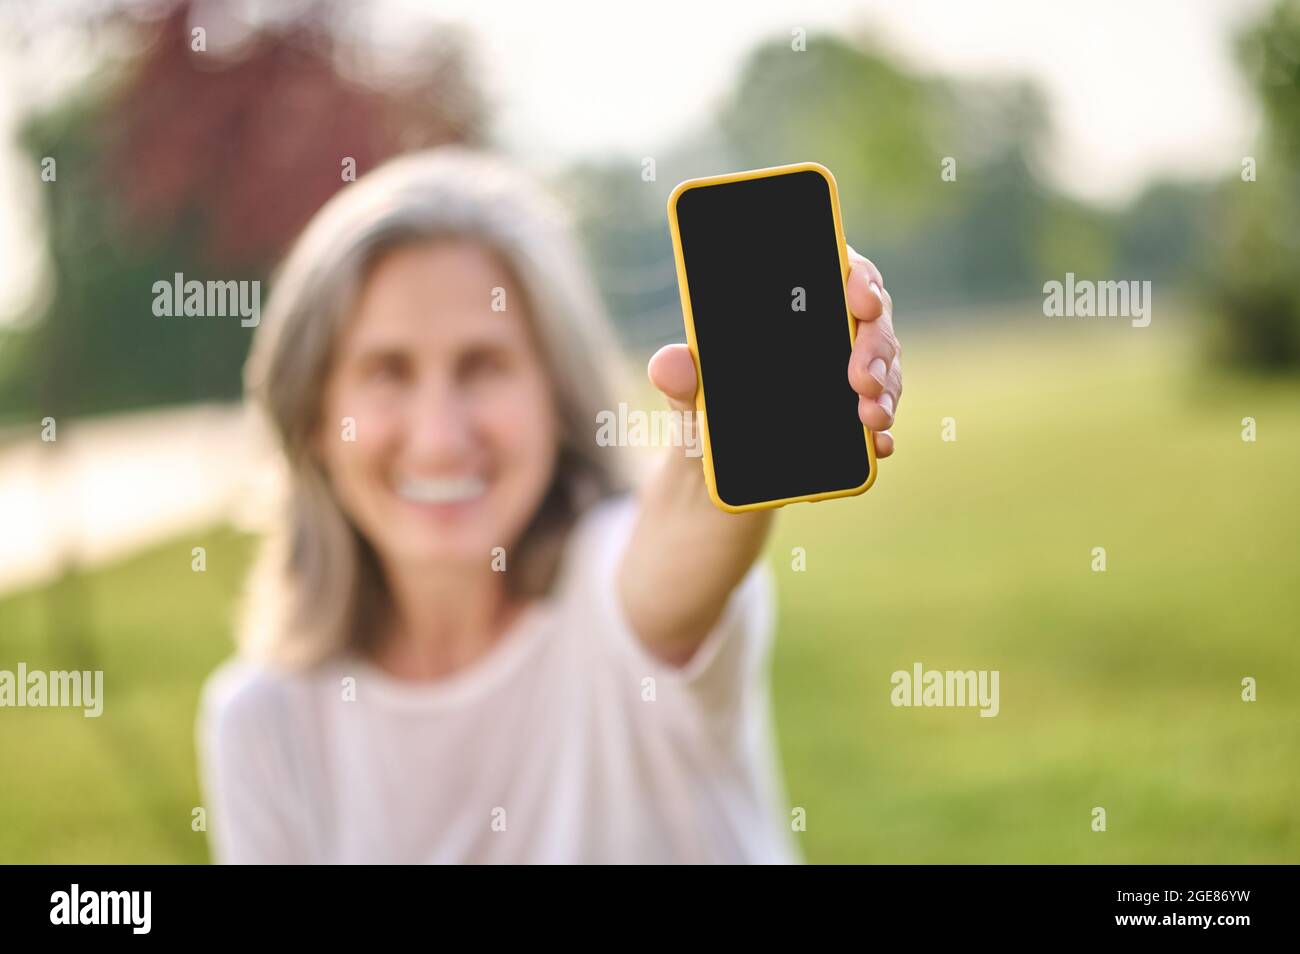 Smartphone in outstretched hand of smiling woman Stock Photo